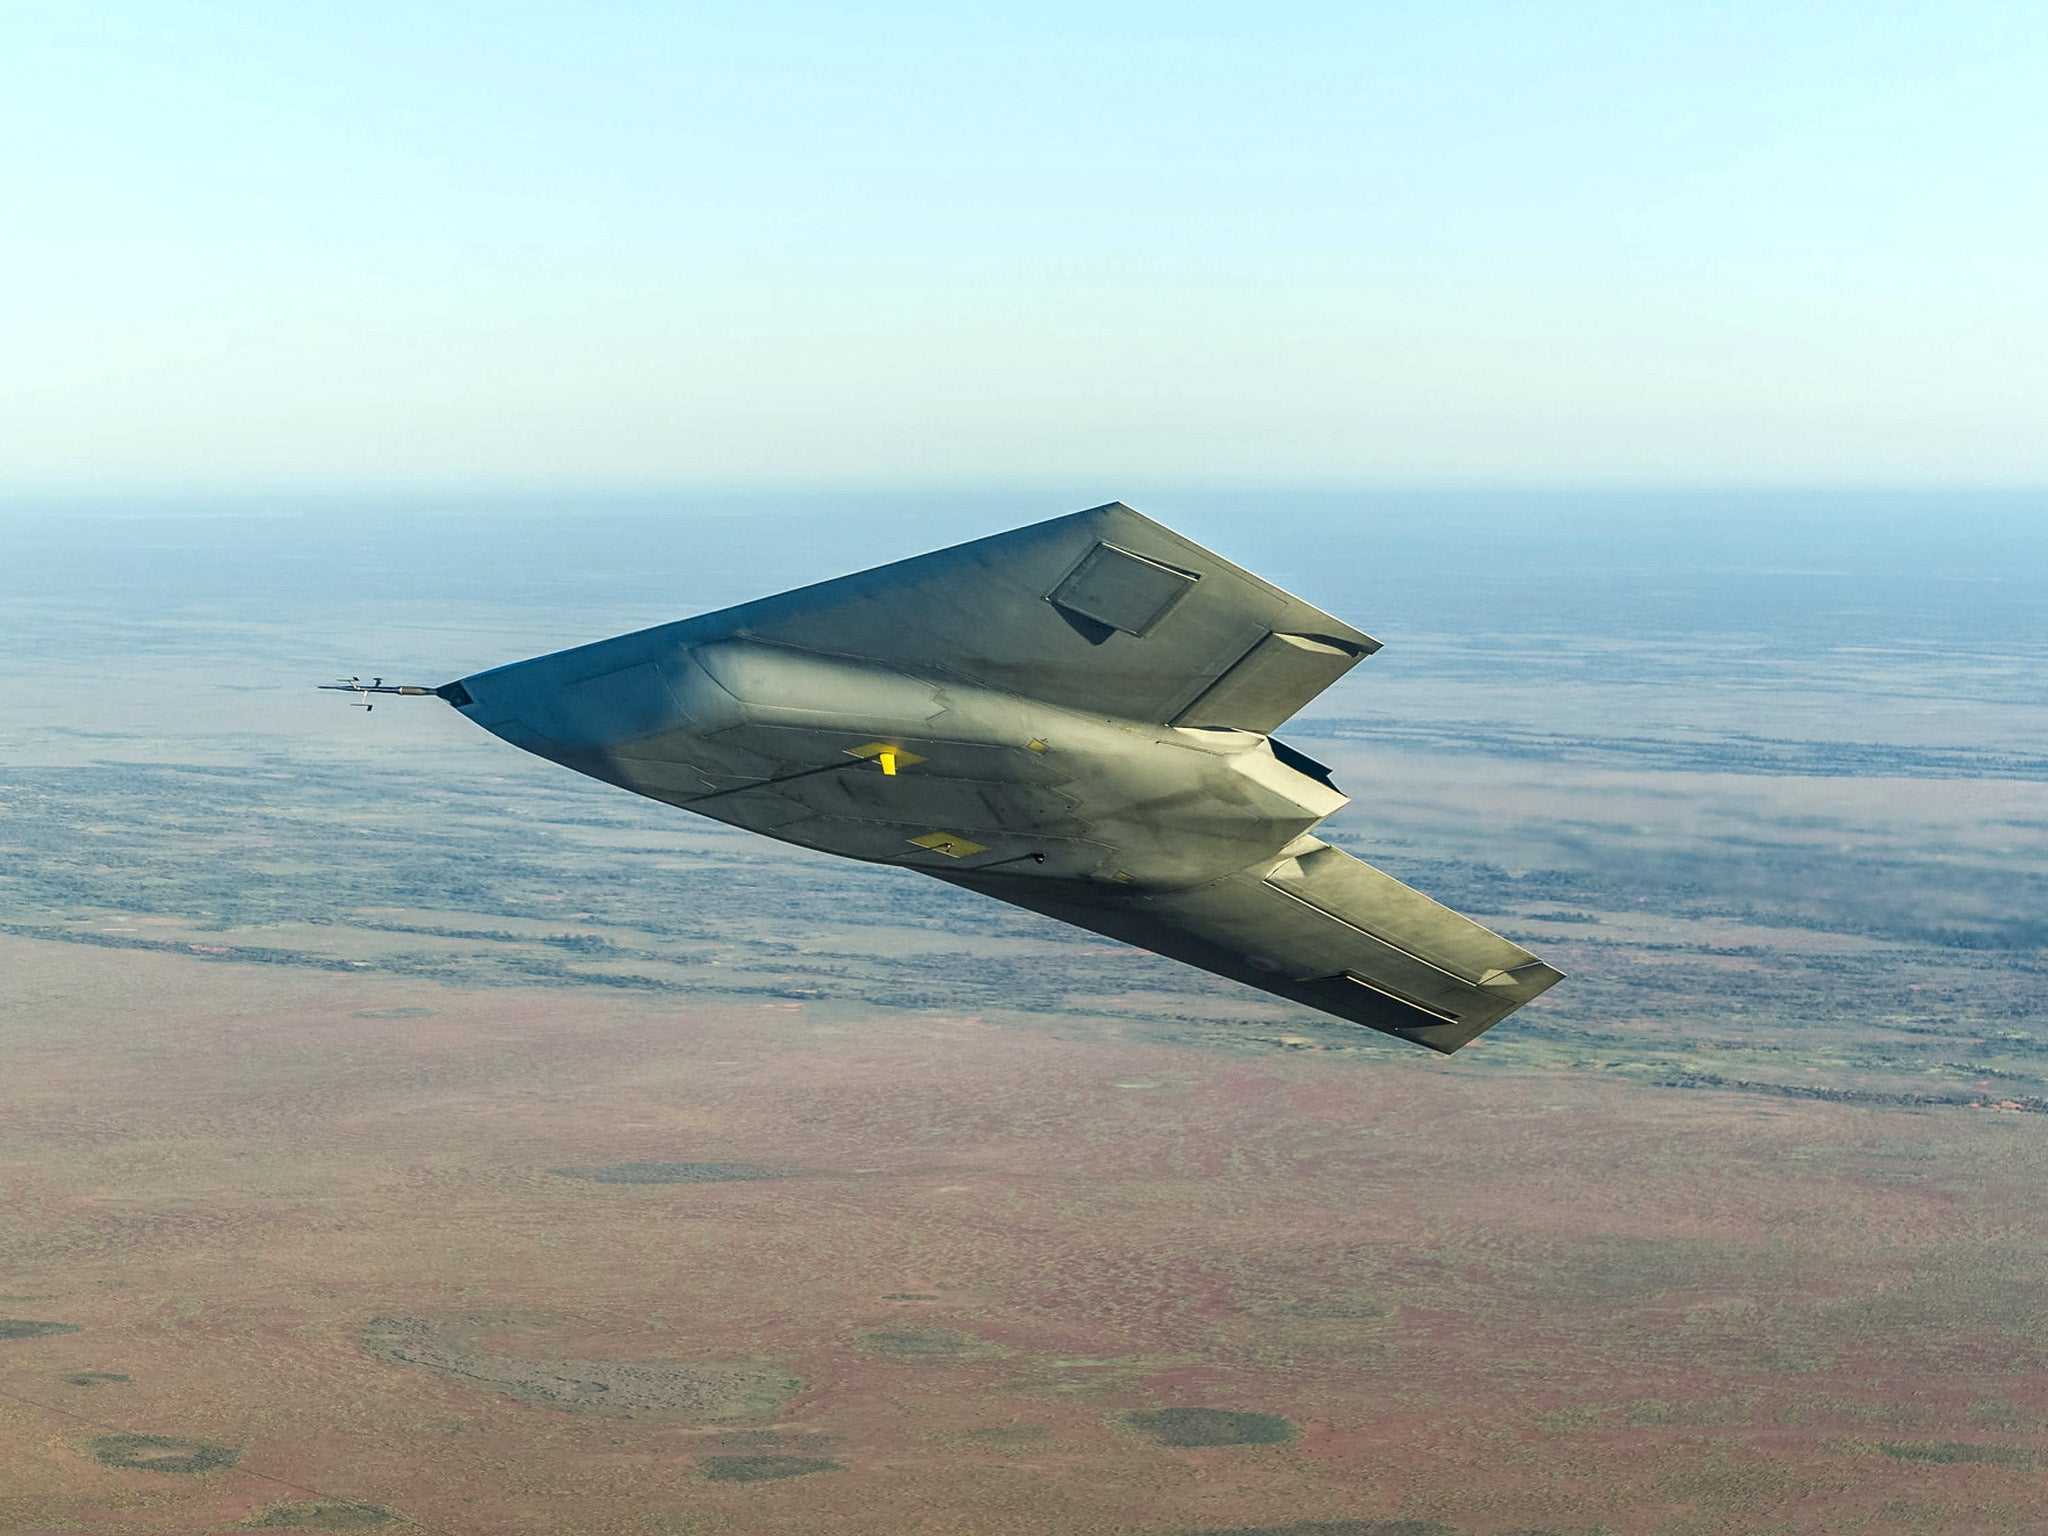 Taranis surpassed all expectations during its first flight trials